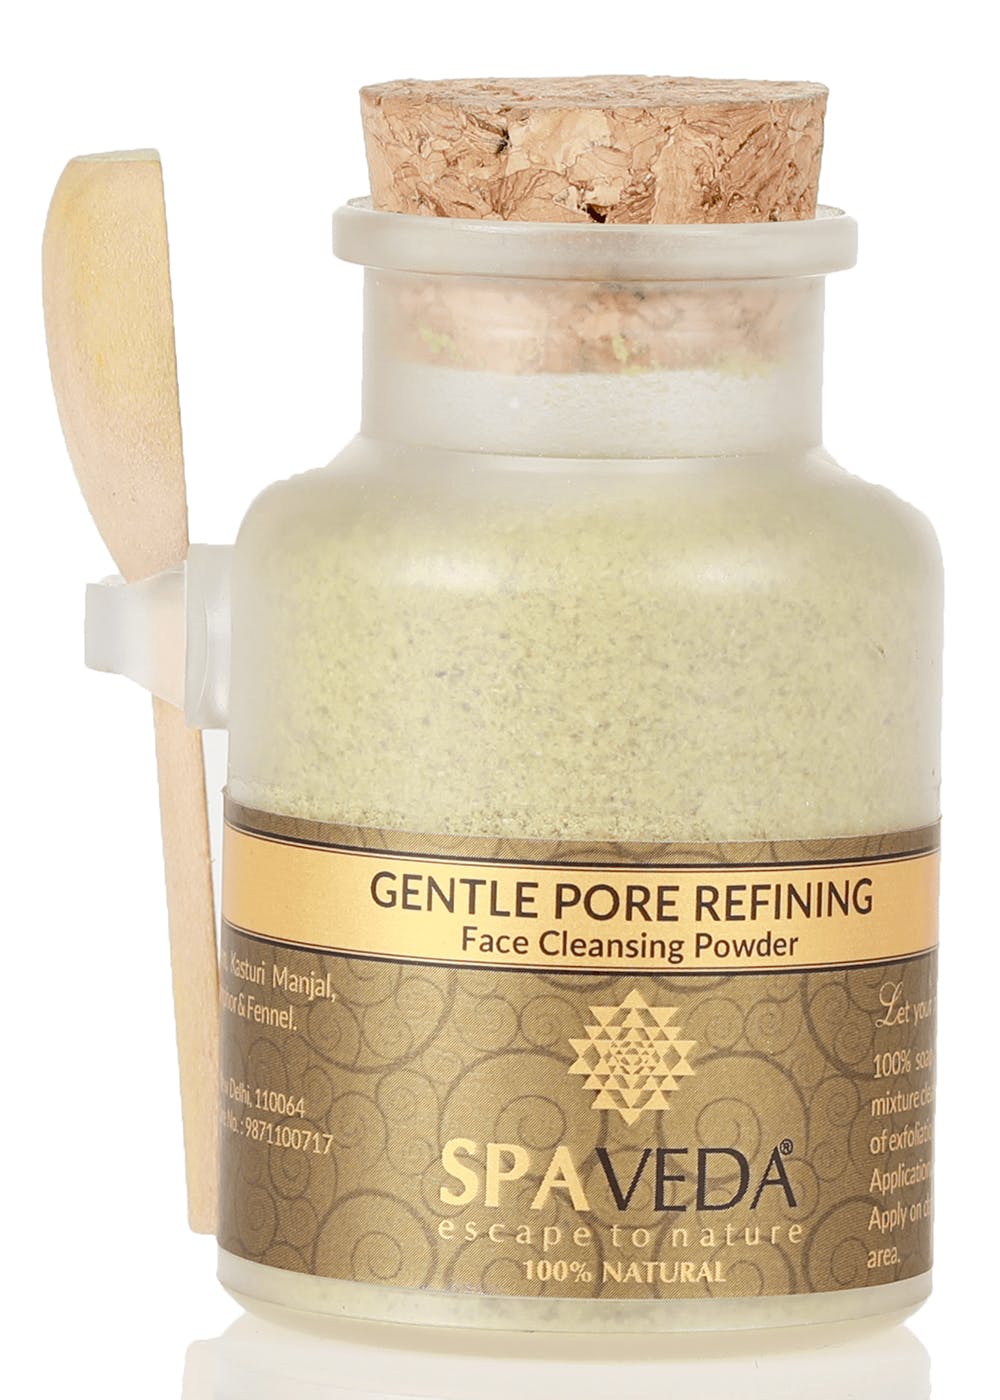 Gentle Pore Refining Face Cleansing Powder